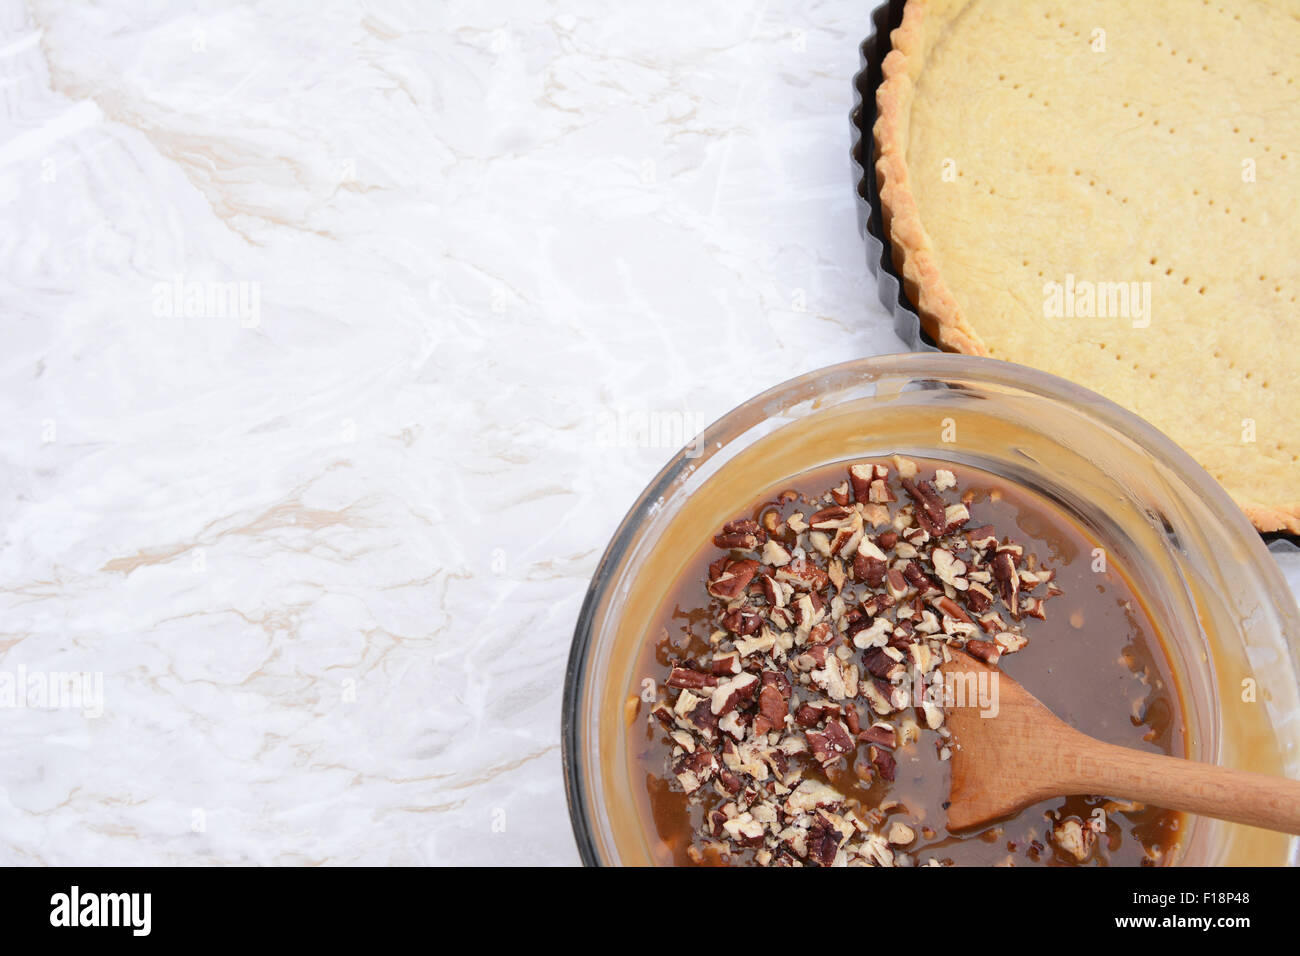 Baking pecan pie - nut-filled pie filling in a bowl next to the prepared pie crust, with copy space on the kitchen worktop Stock Photo